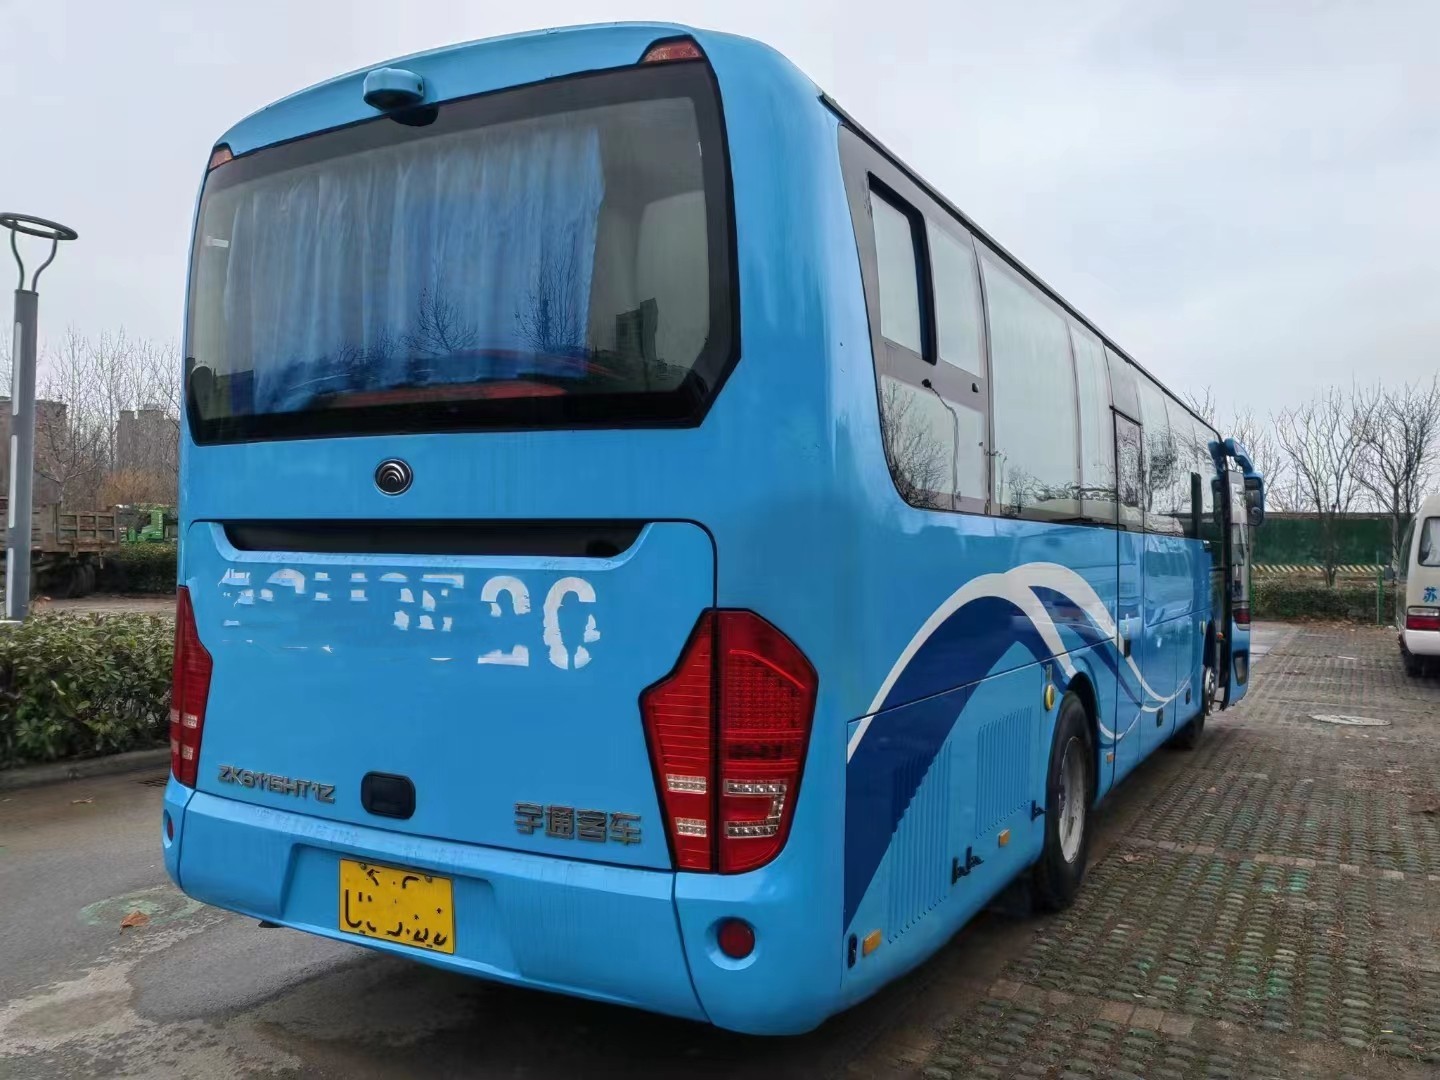  Used Coach Bus Double Glass Yutong Zk6115 60seats Yuchai Engine Two Doors With Air Condition Manufactures